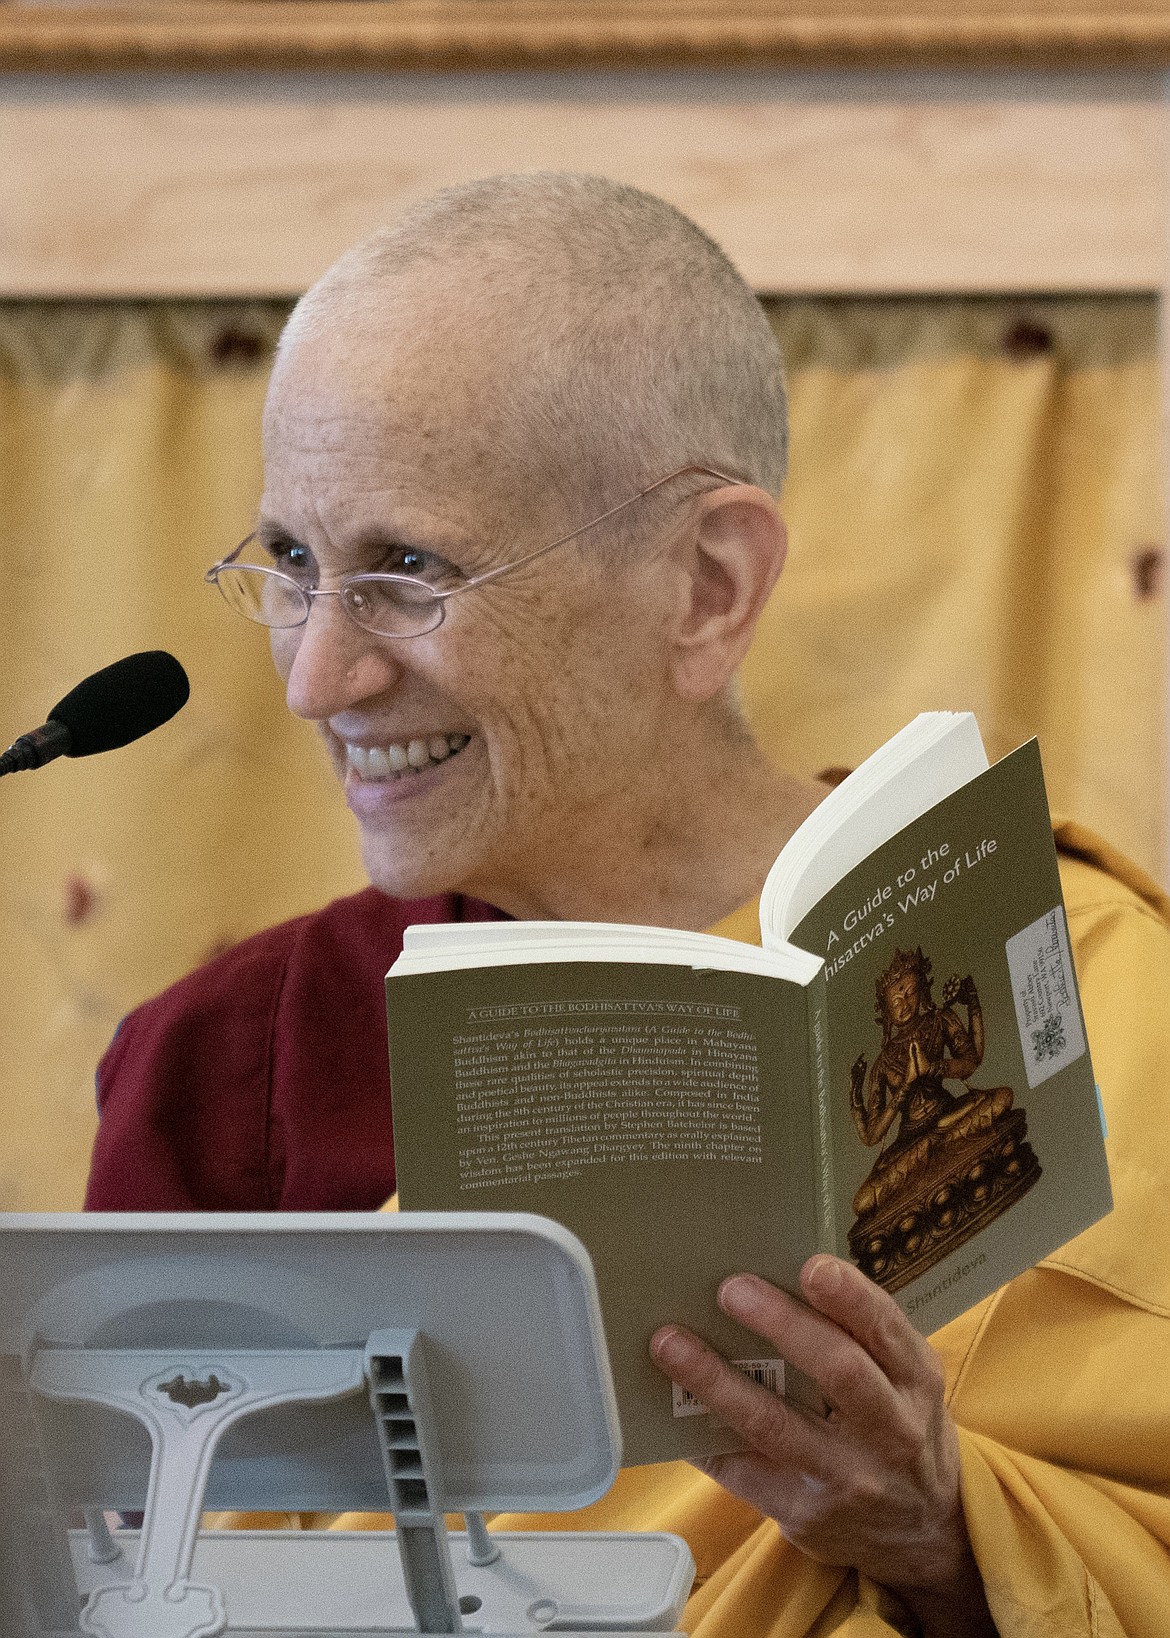 Sravasti Abbey’s Sharing the Dharma features advice from “An Open-hearted Life,” co-authored by abbey founder Venerable Thubten Chodron and Eastern Washington University psychologist Dr. Russell Kolts.